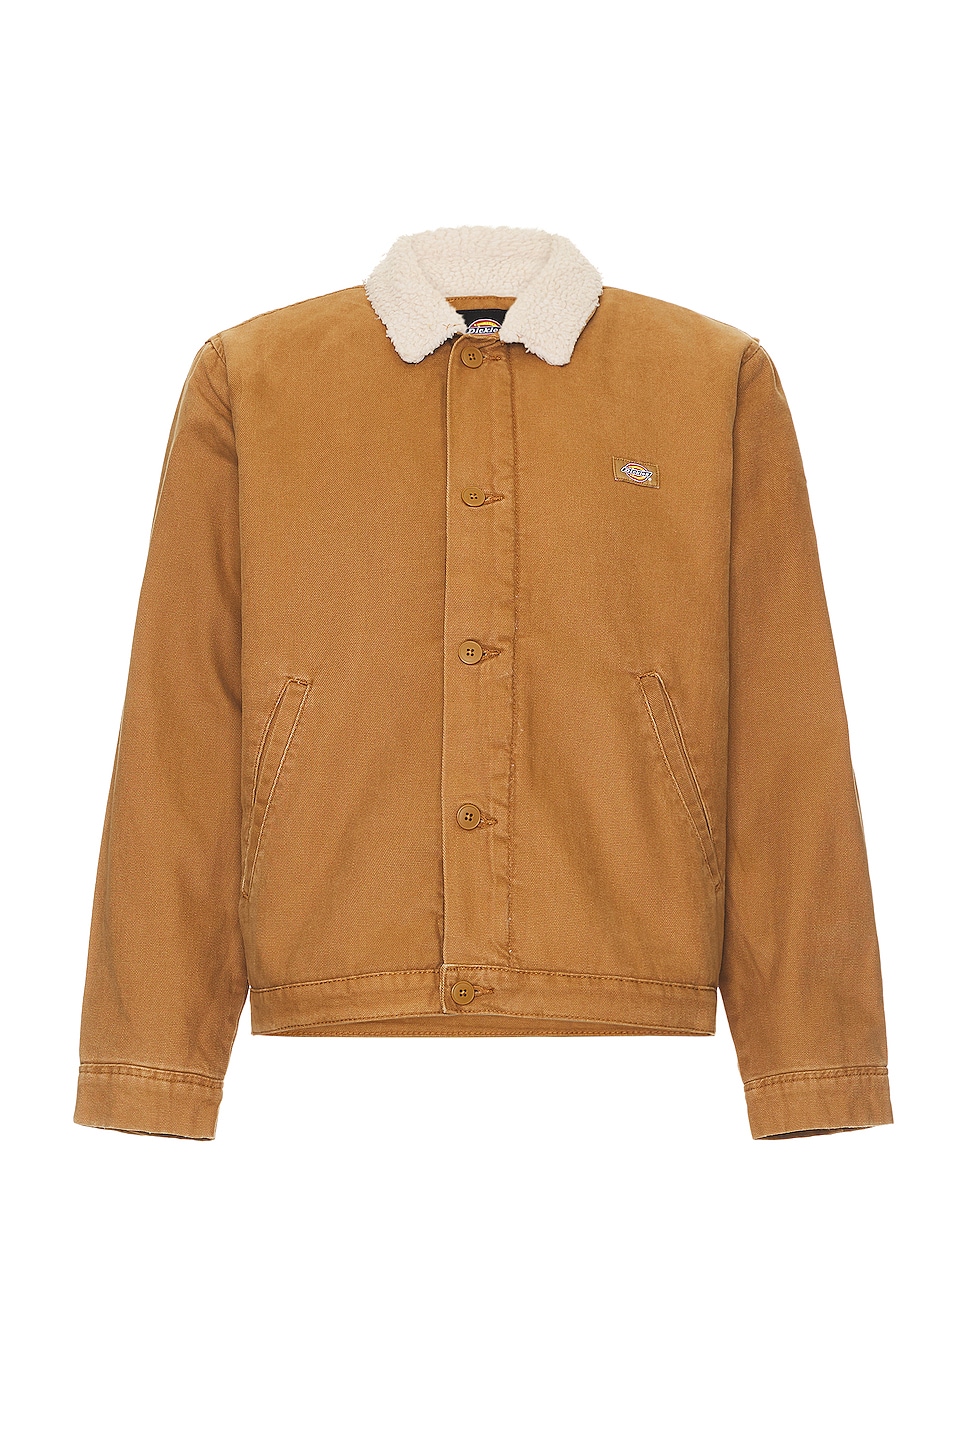 Image 1 of Dickies Textured Fleece Lined Duck Canvas Jacket in Stonewashed Brown Duck